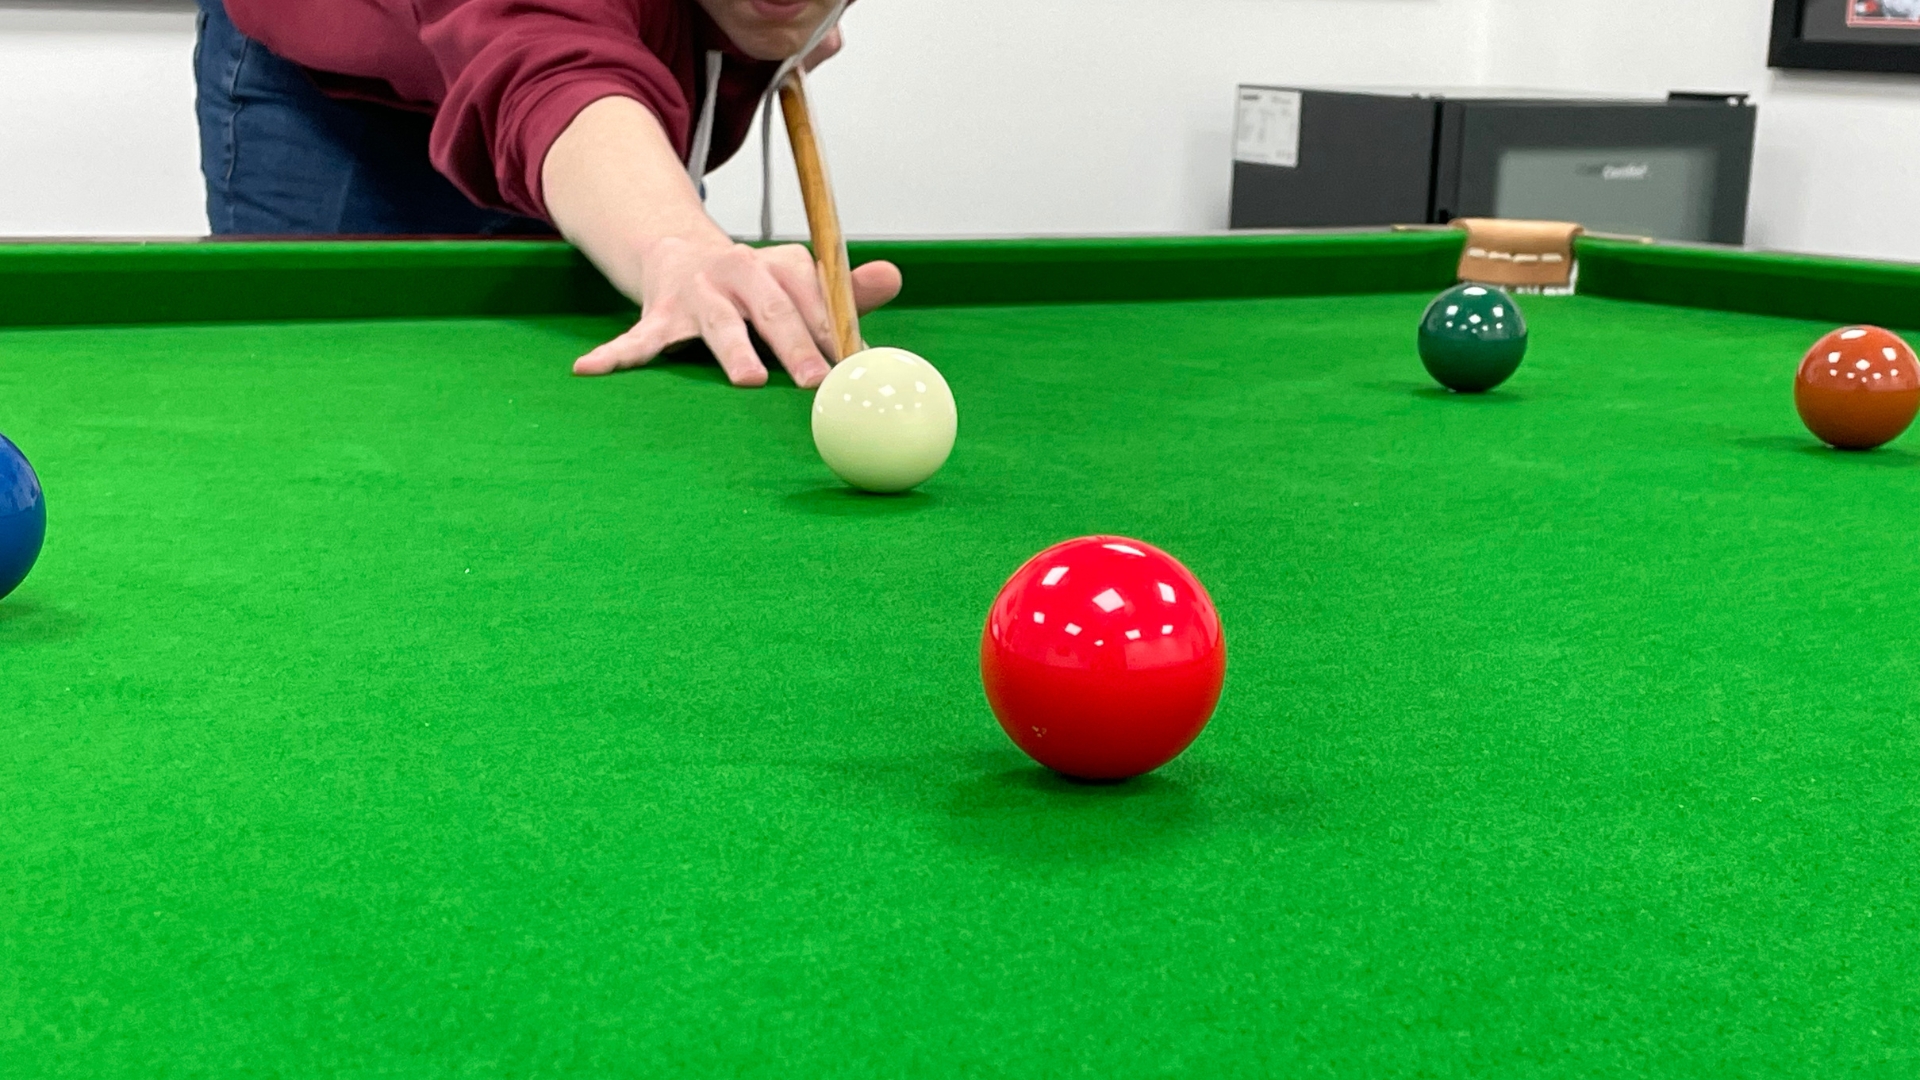 Coaching: How to put spin on the cue ball